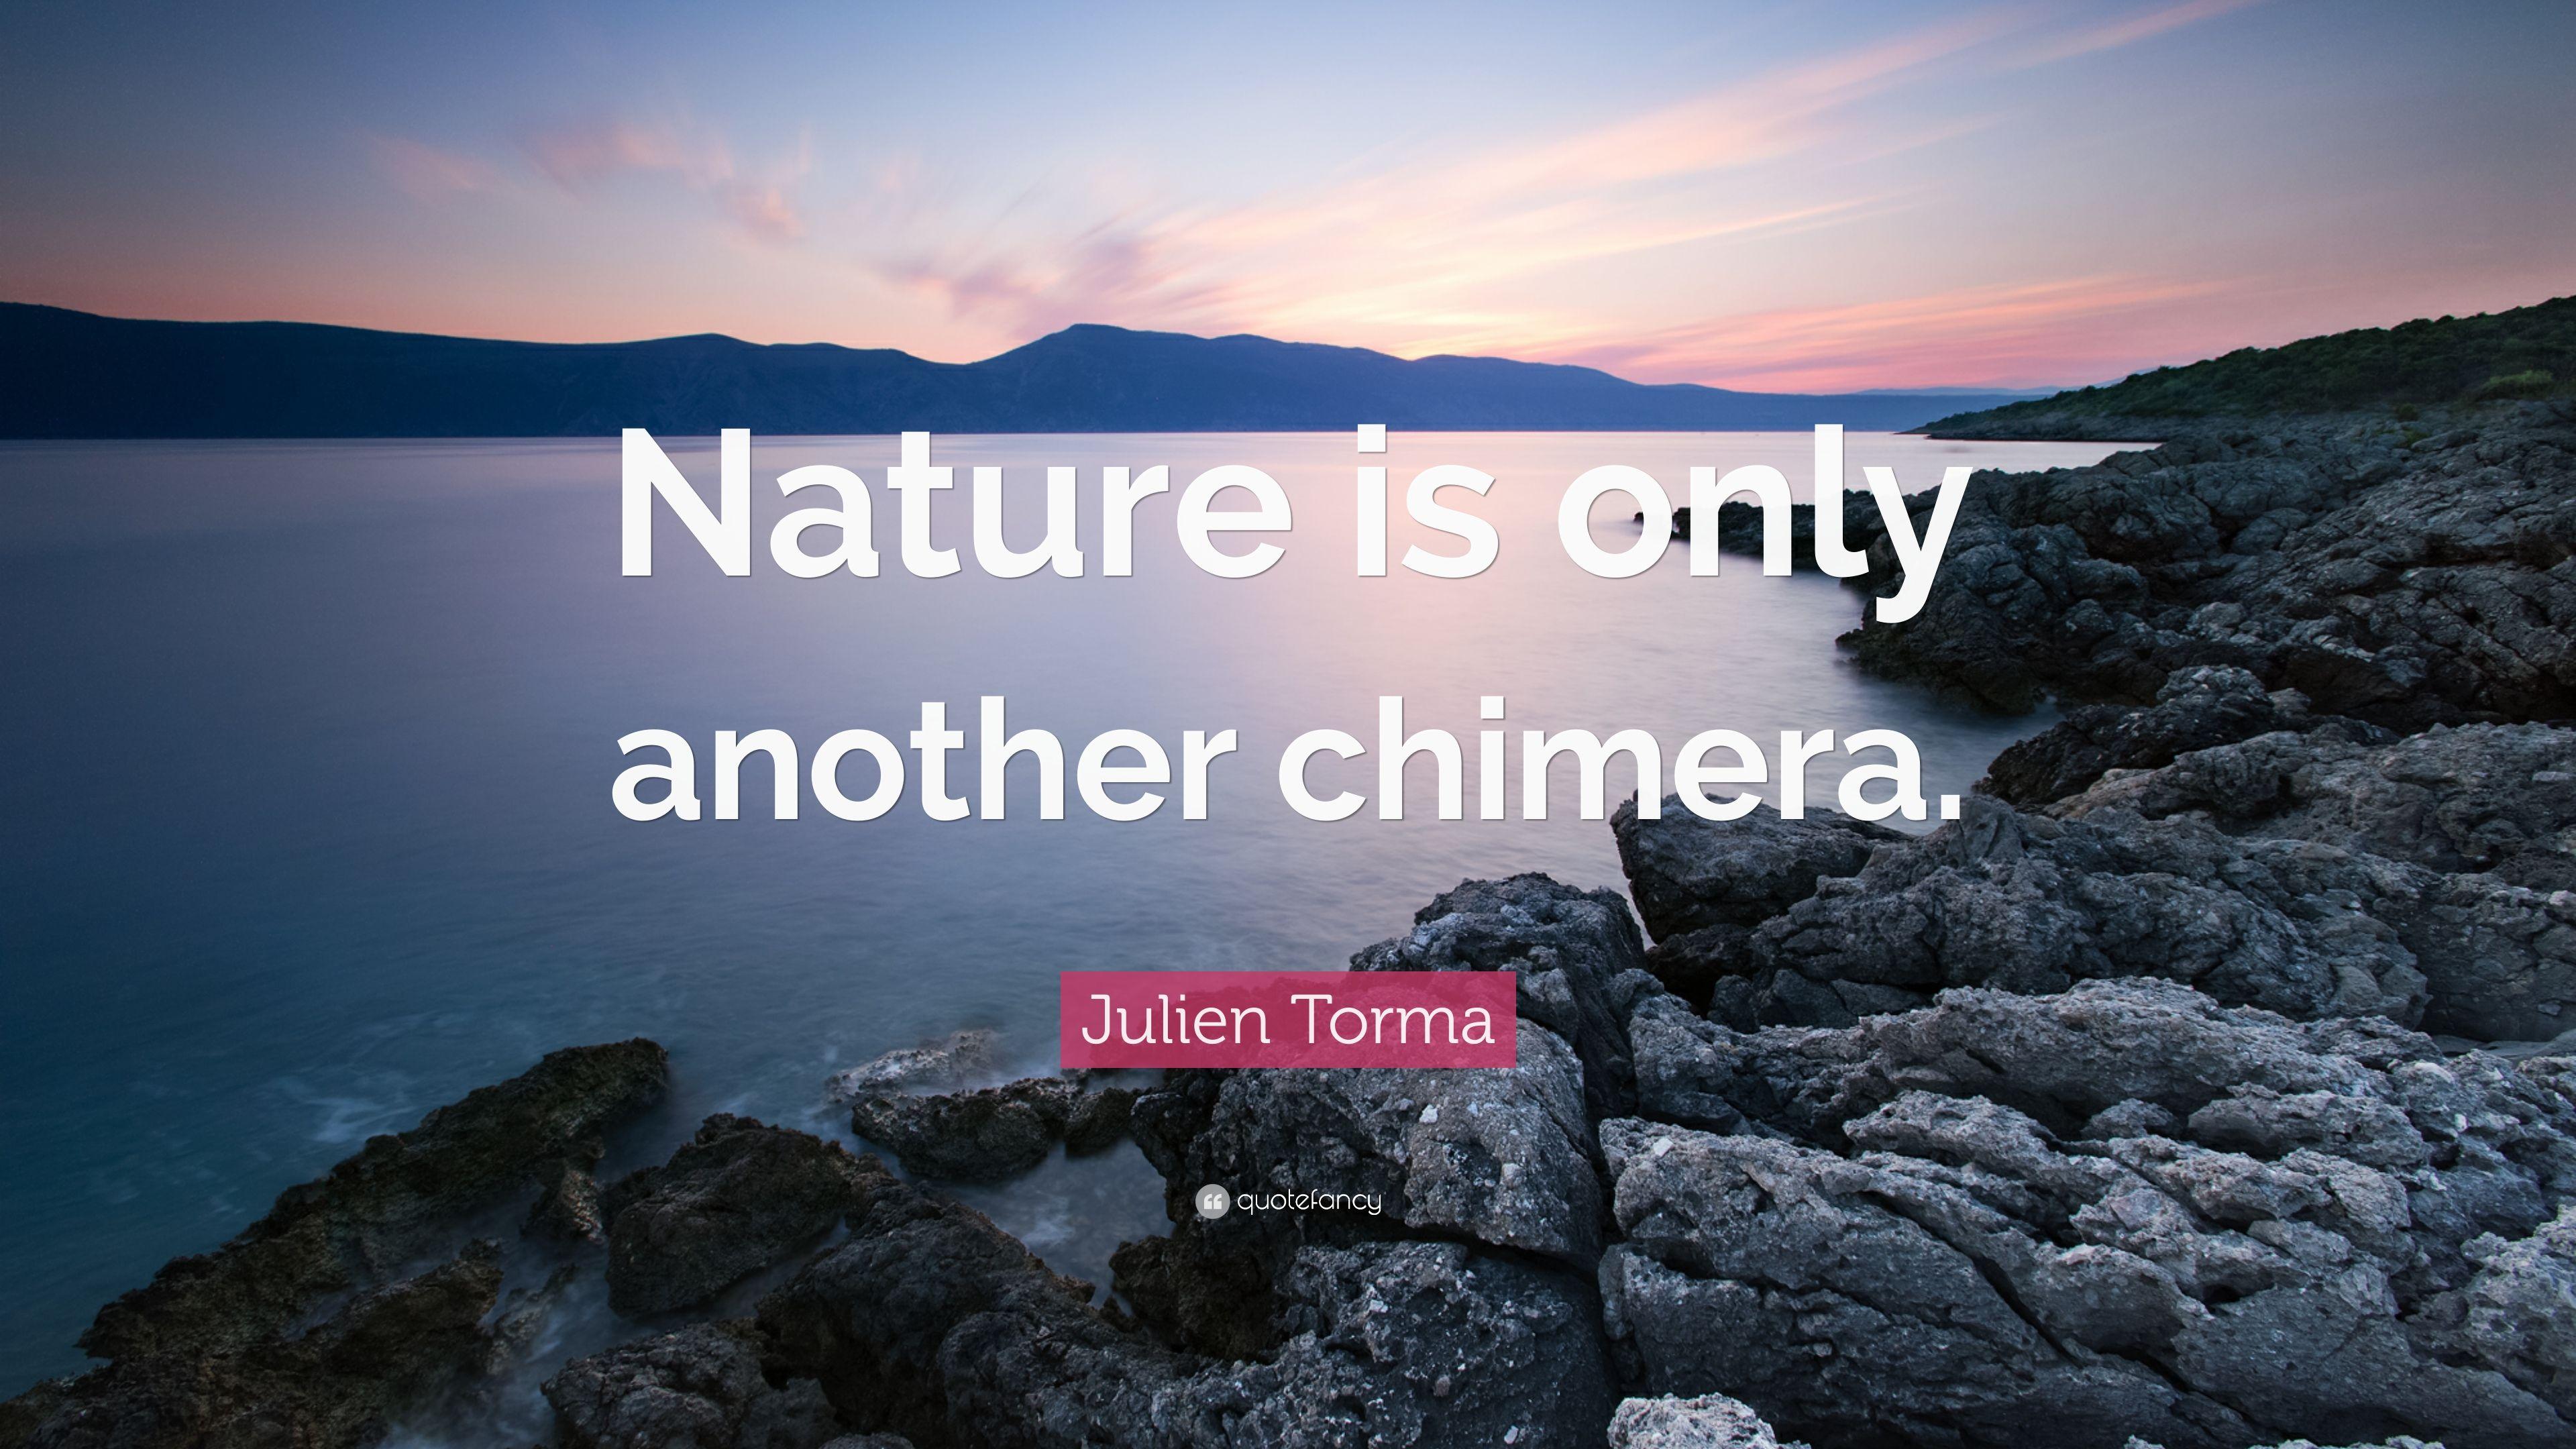 Julien Torma Quote: “Nature is only another chimera.” 7 wallpaper